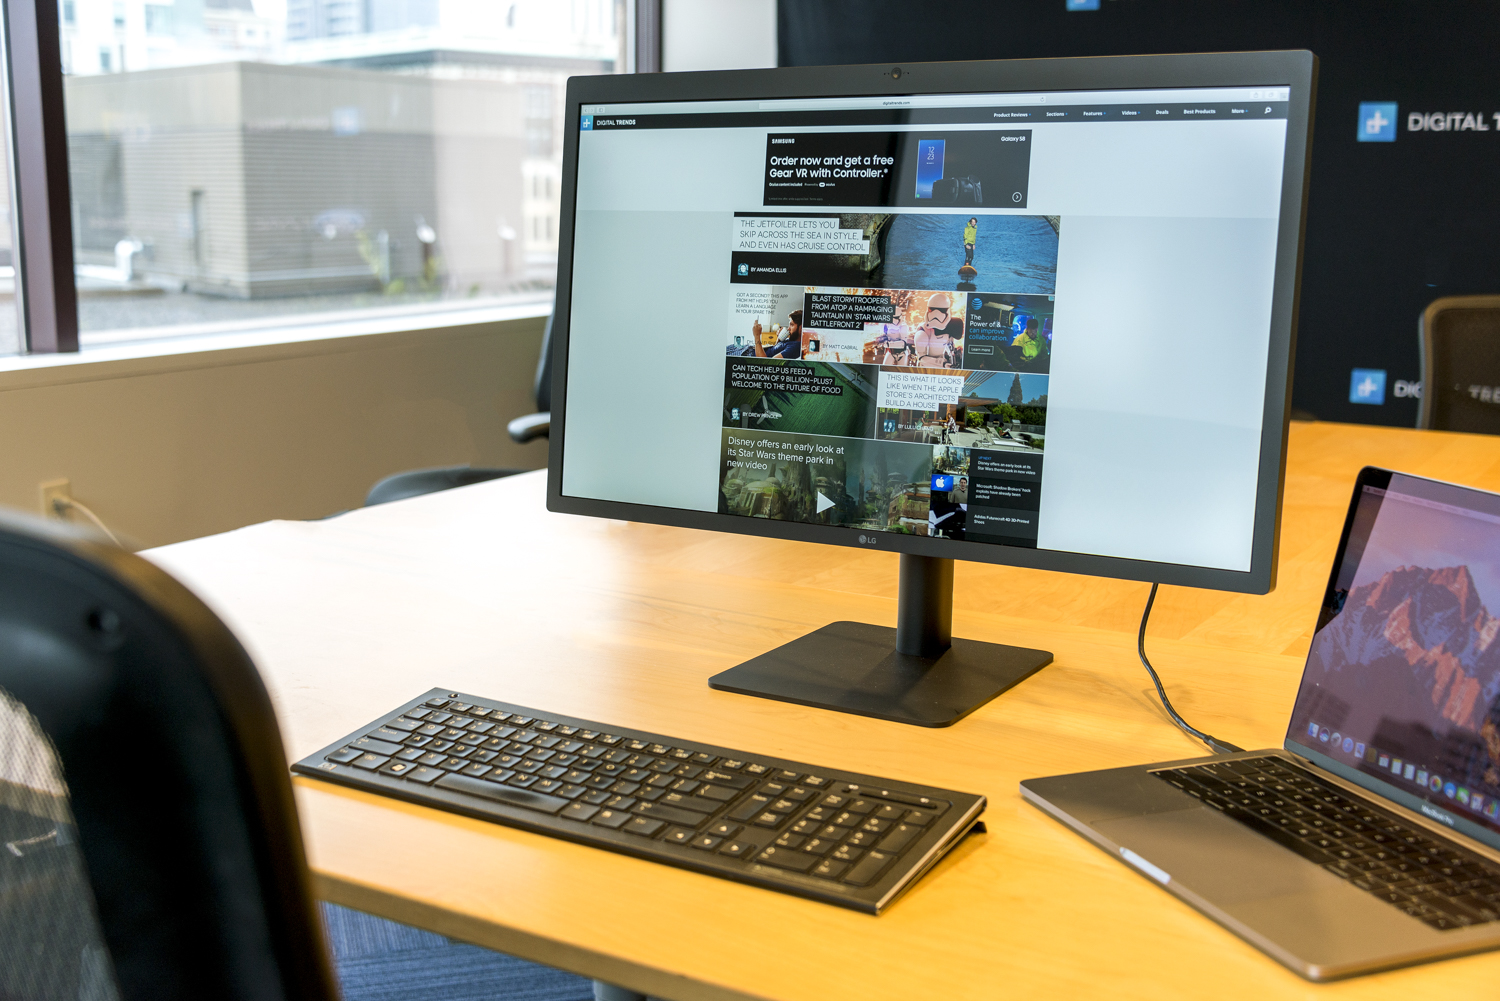 Studio Display review: An Apple monitor where “5K” doesn't describe the  price